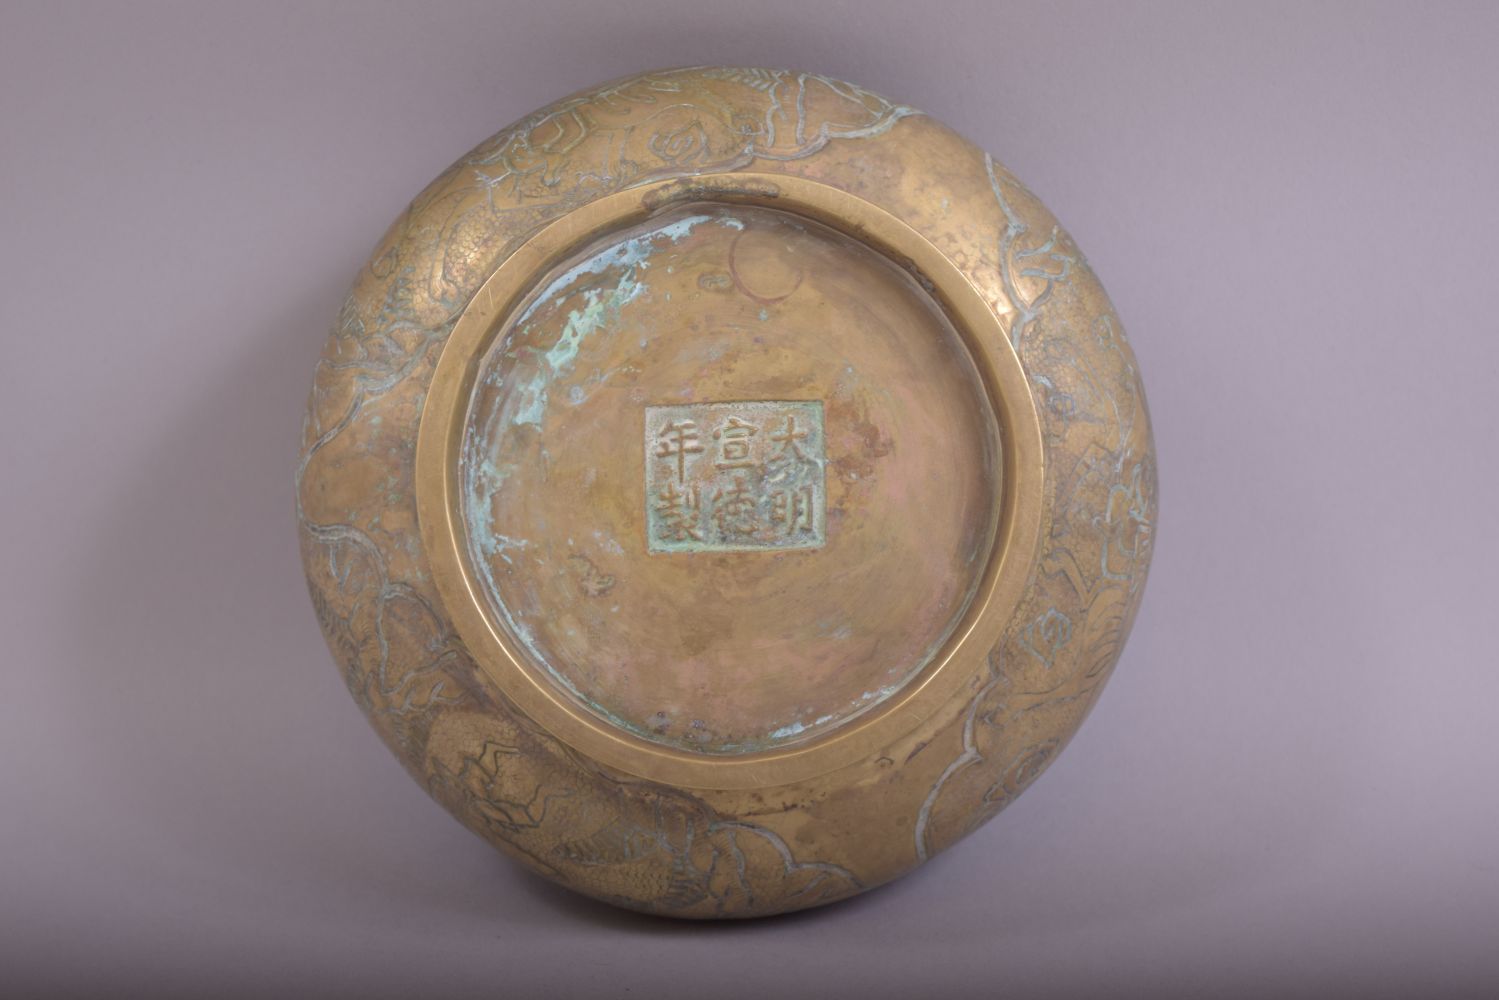 A CHINESE EMBOSSED AND CHASED BRONZE BOWL, with scenes of men on horseback in outdoor settings, - Image 6 of 7